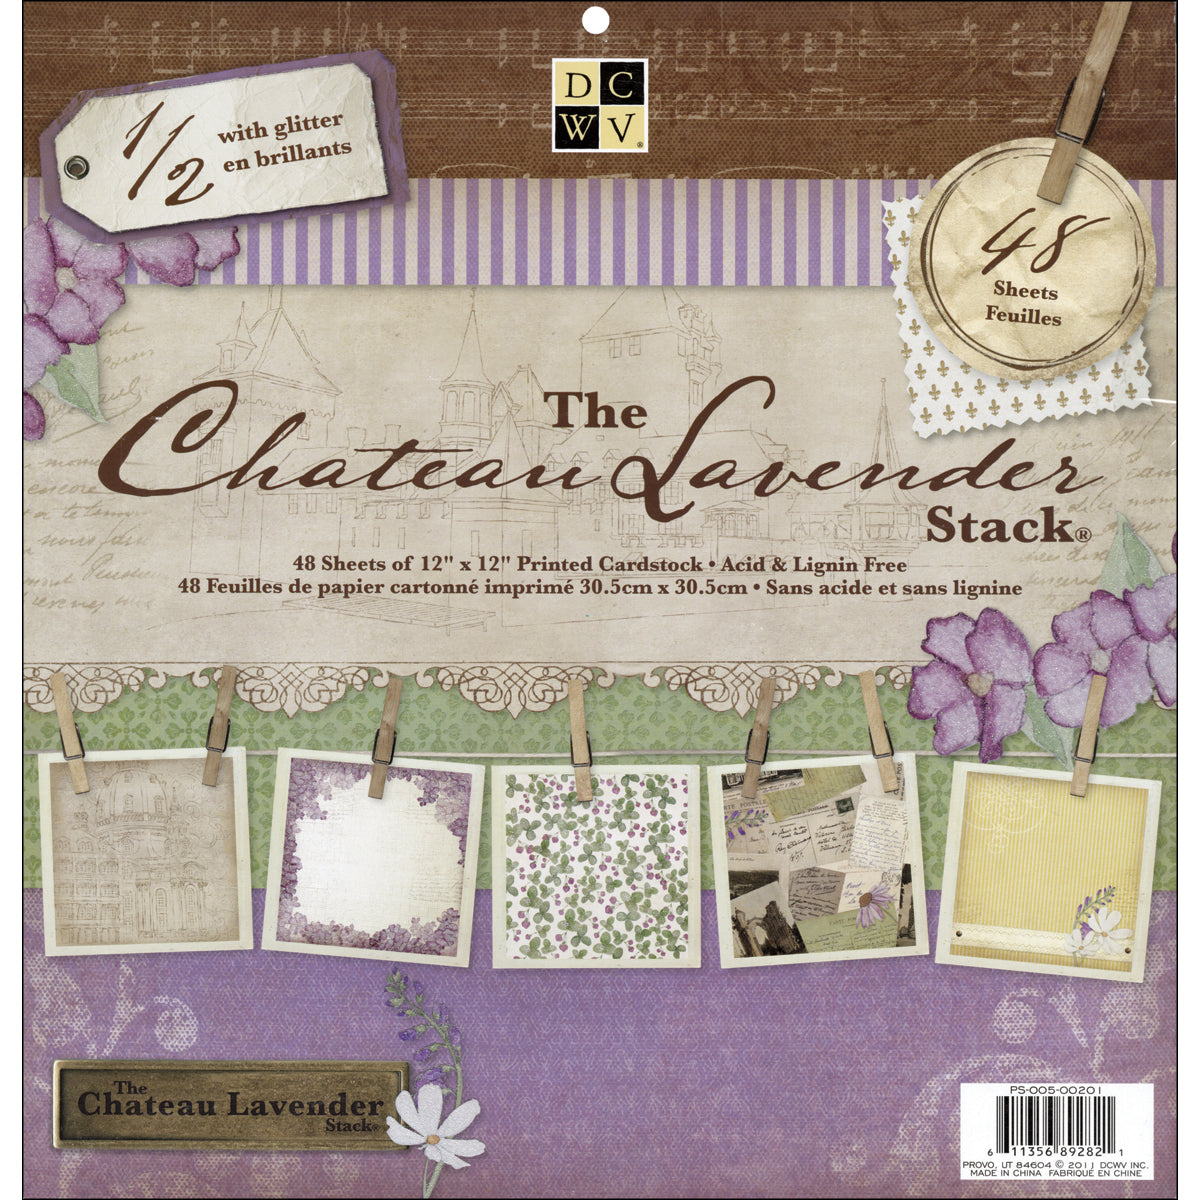 DCWV Single-Sided Cardstock Stack 12"X12" 48/Pkg-Chateau Lavender, 24 Designs/2 Each